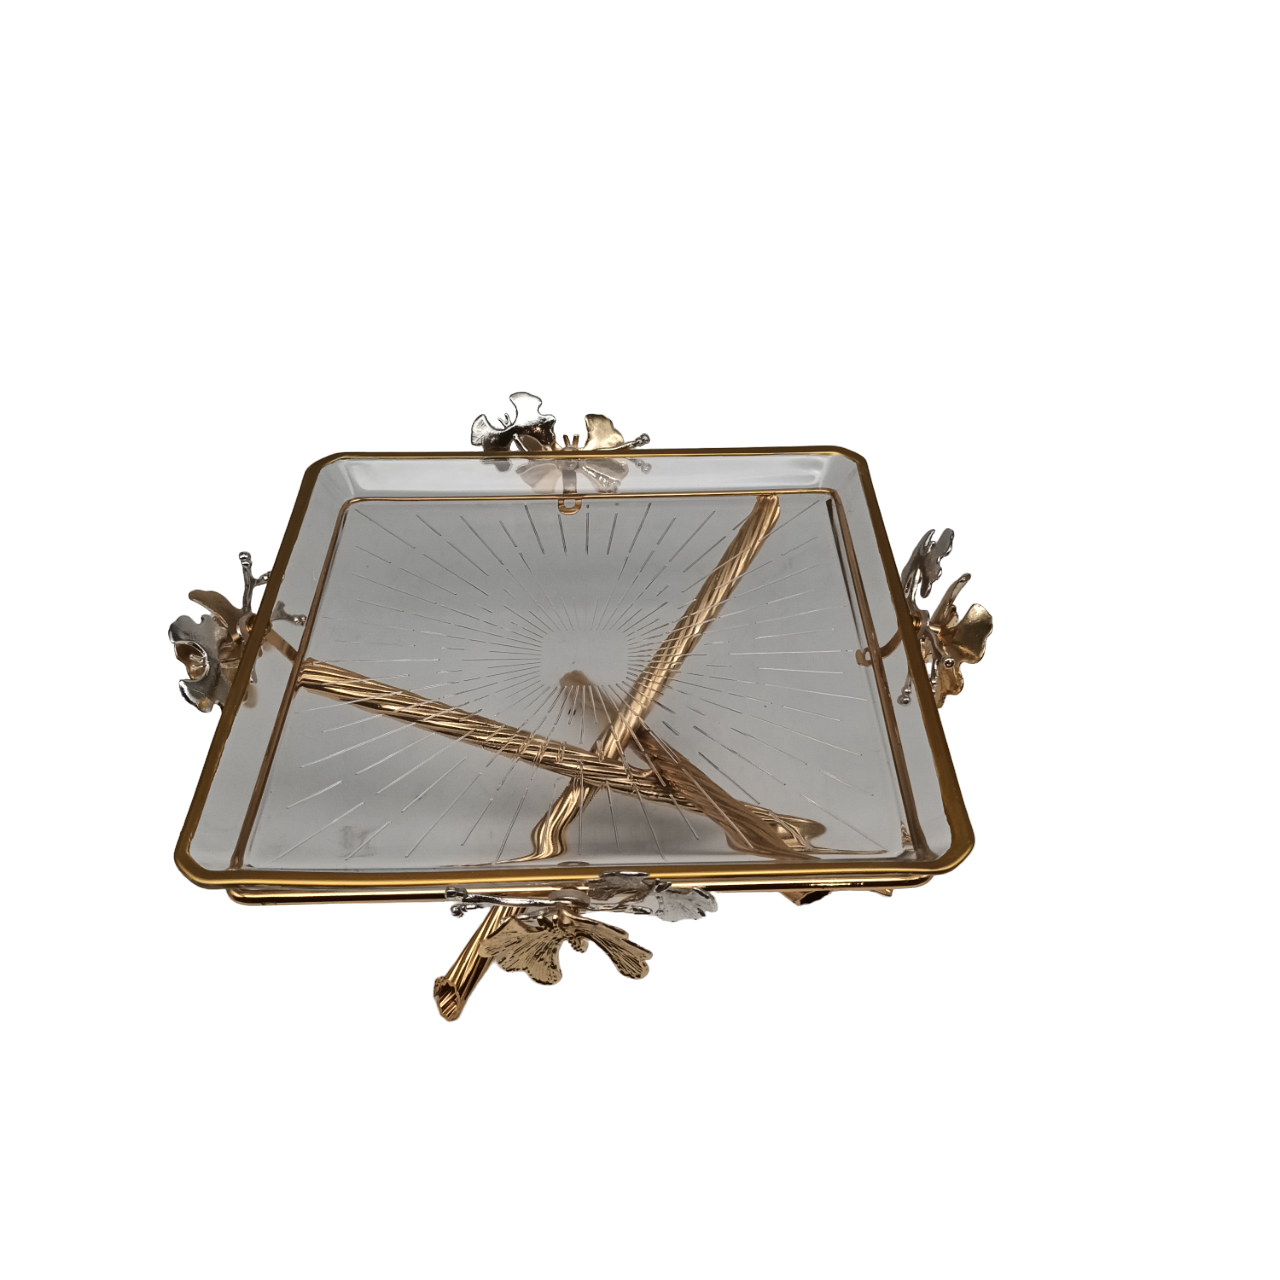 Large Square Golden Platter with Cross Legs